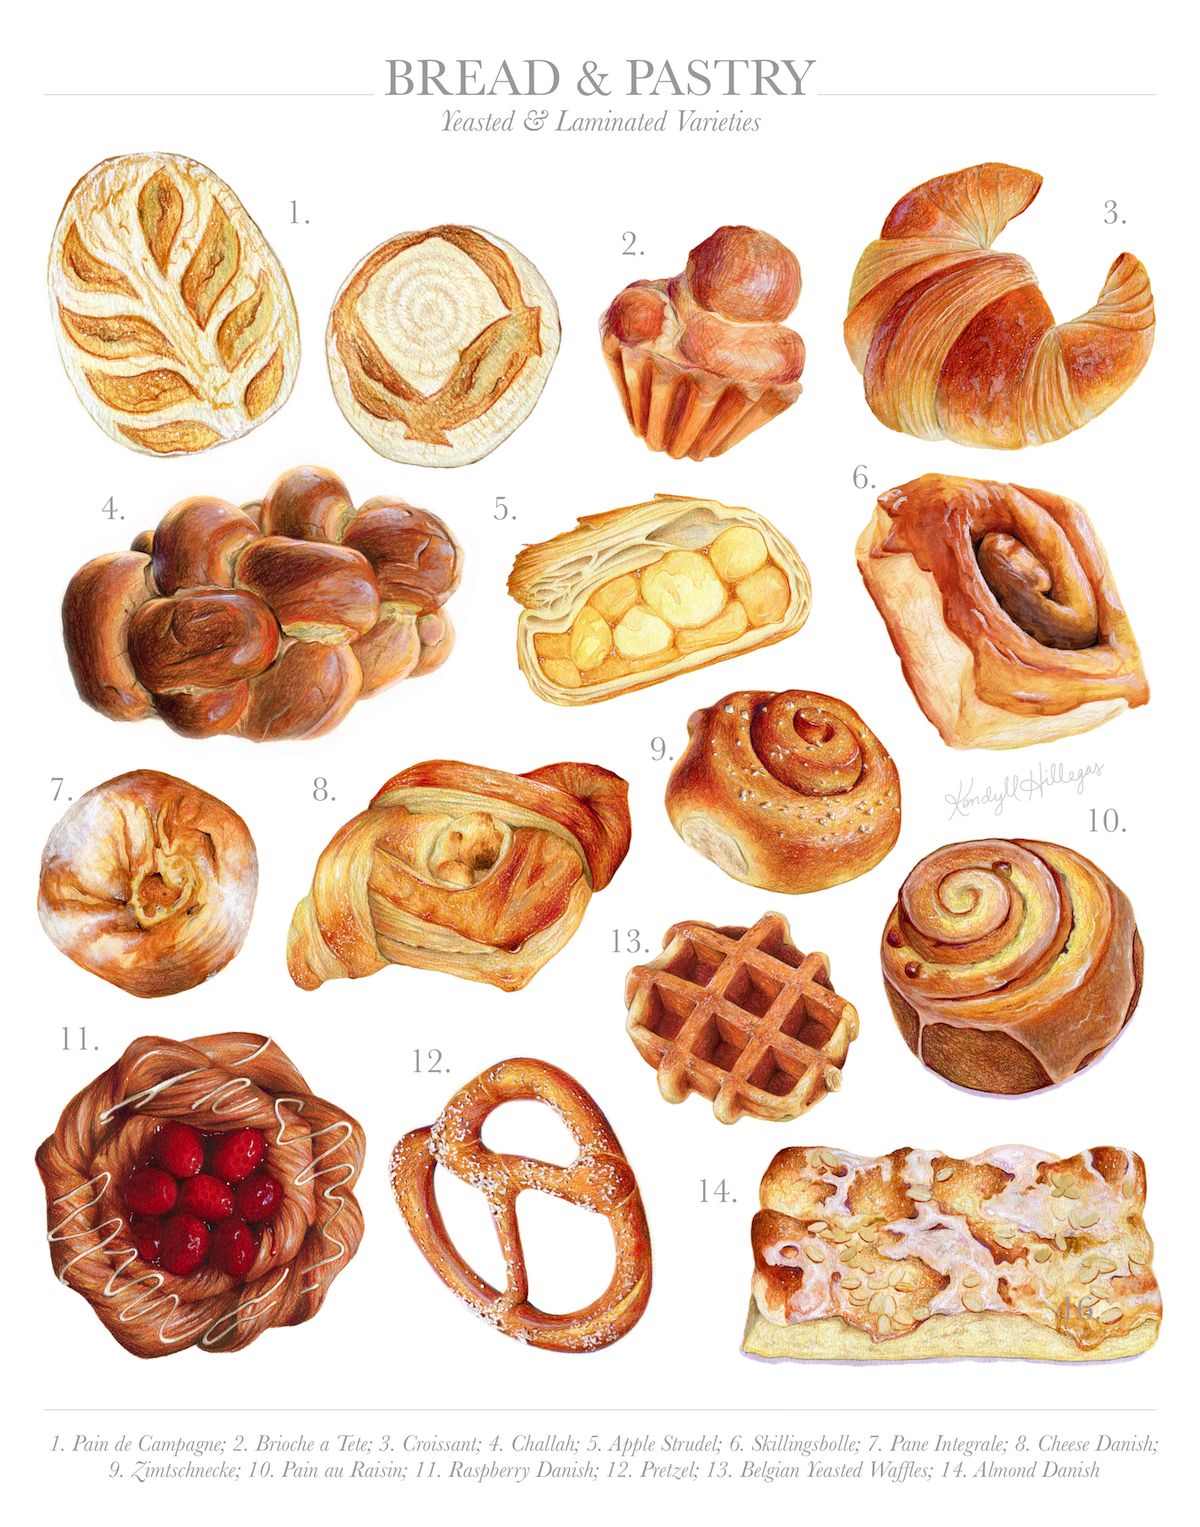 Water colour illustrations of pastries by Kendyll Hillegas https://kendyllhillegas.tumblr.com/post/144047550019/bread-pastry